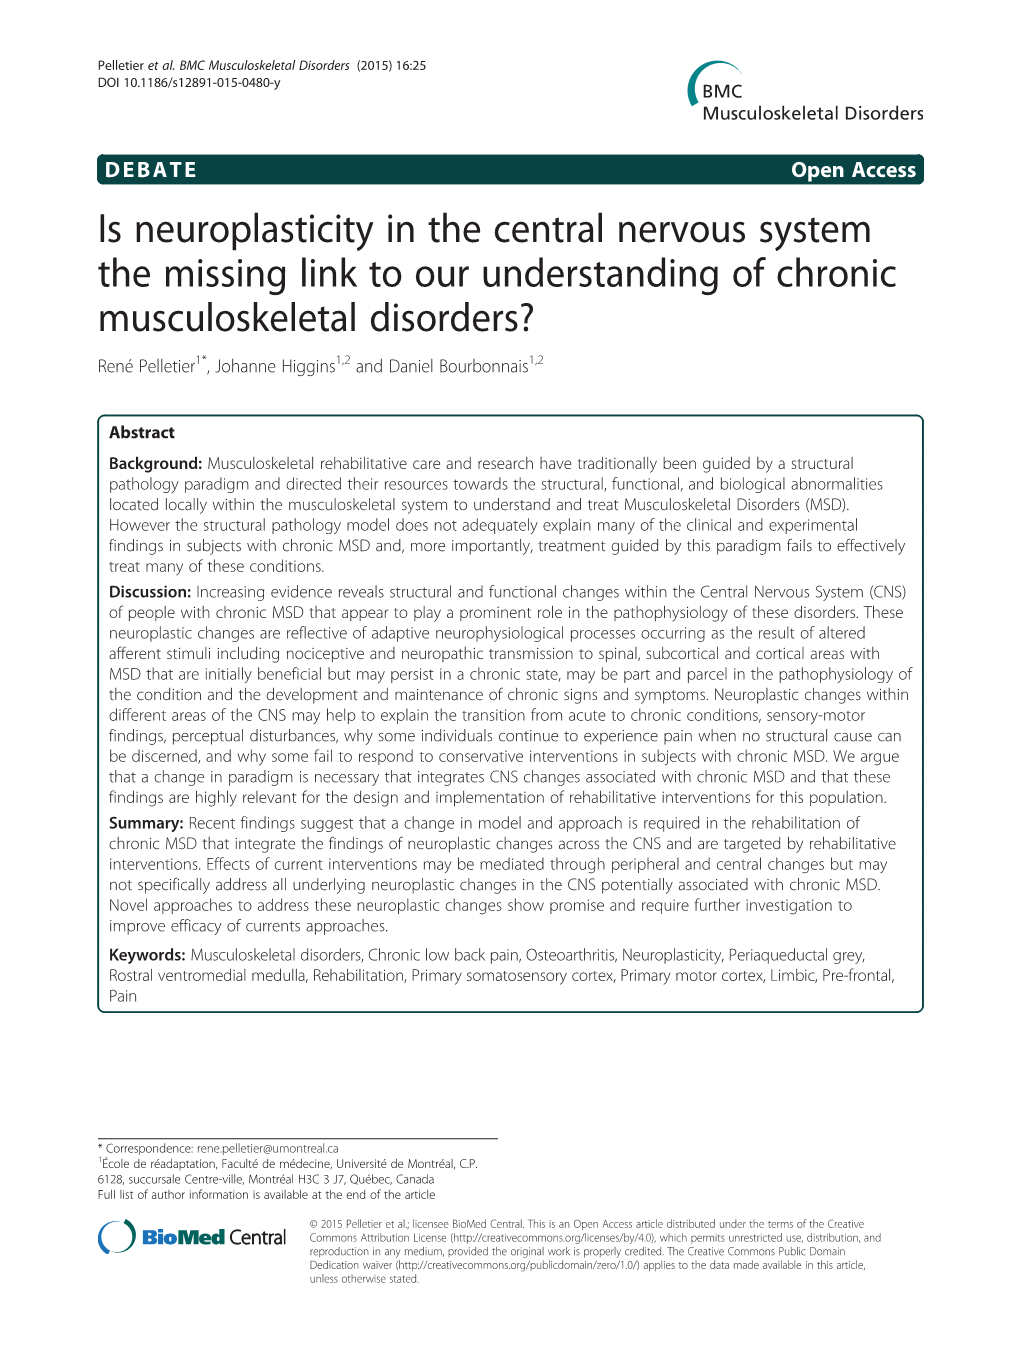 Is Neuroplasticity in the Central Nervous System the Missing Link To